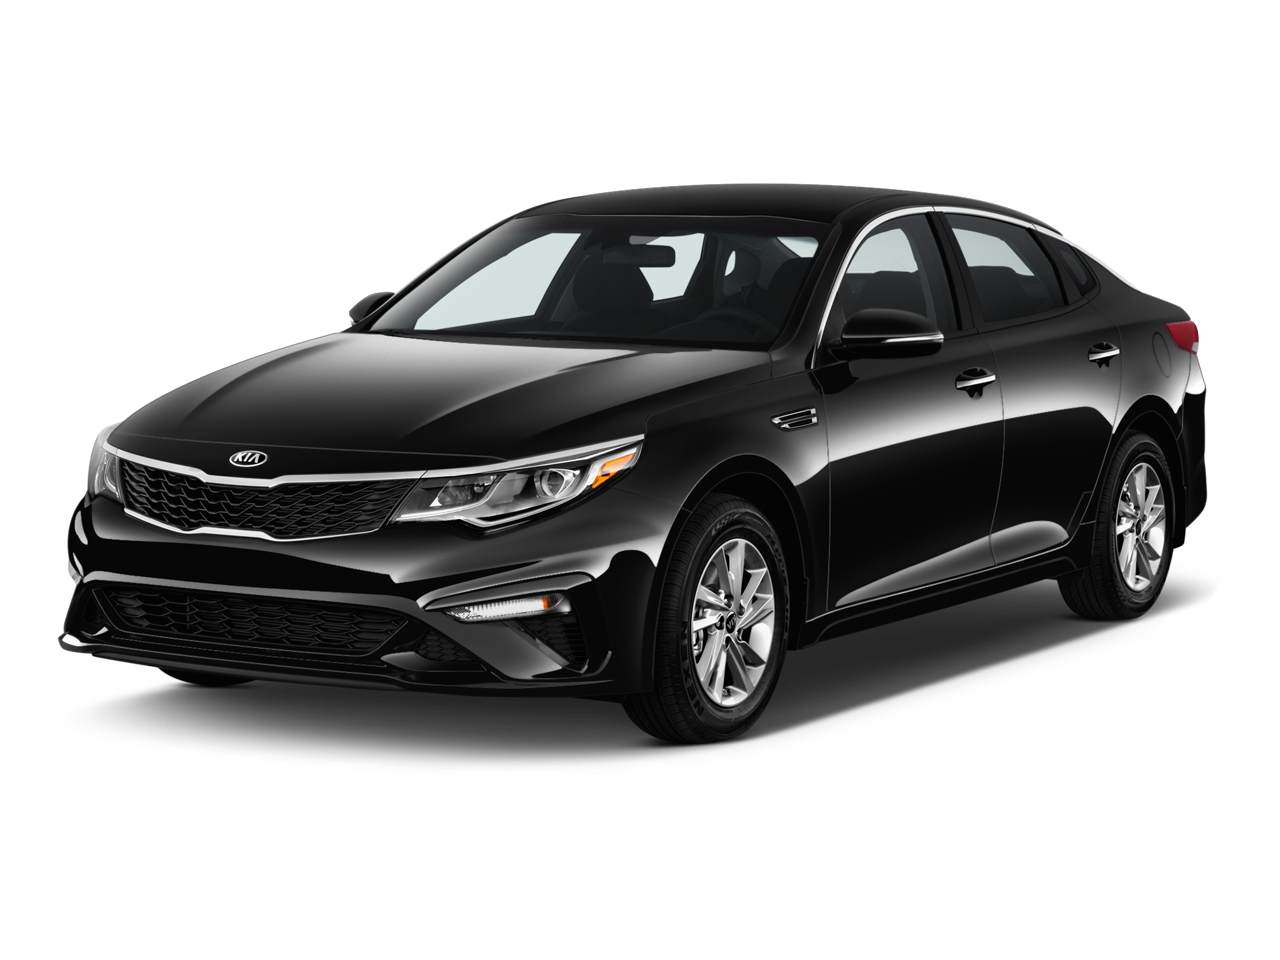 Used 2020 Kia Optima LX with VIN 5XXGT4L34LG381258 for sale in Sioux Falls, SD